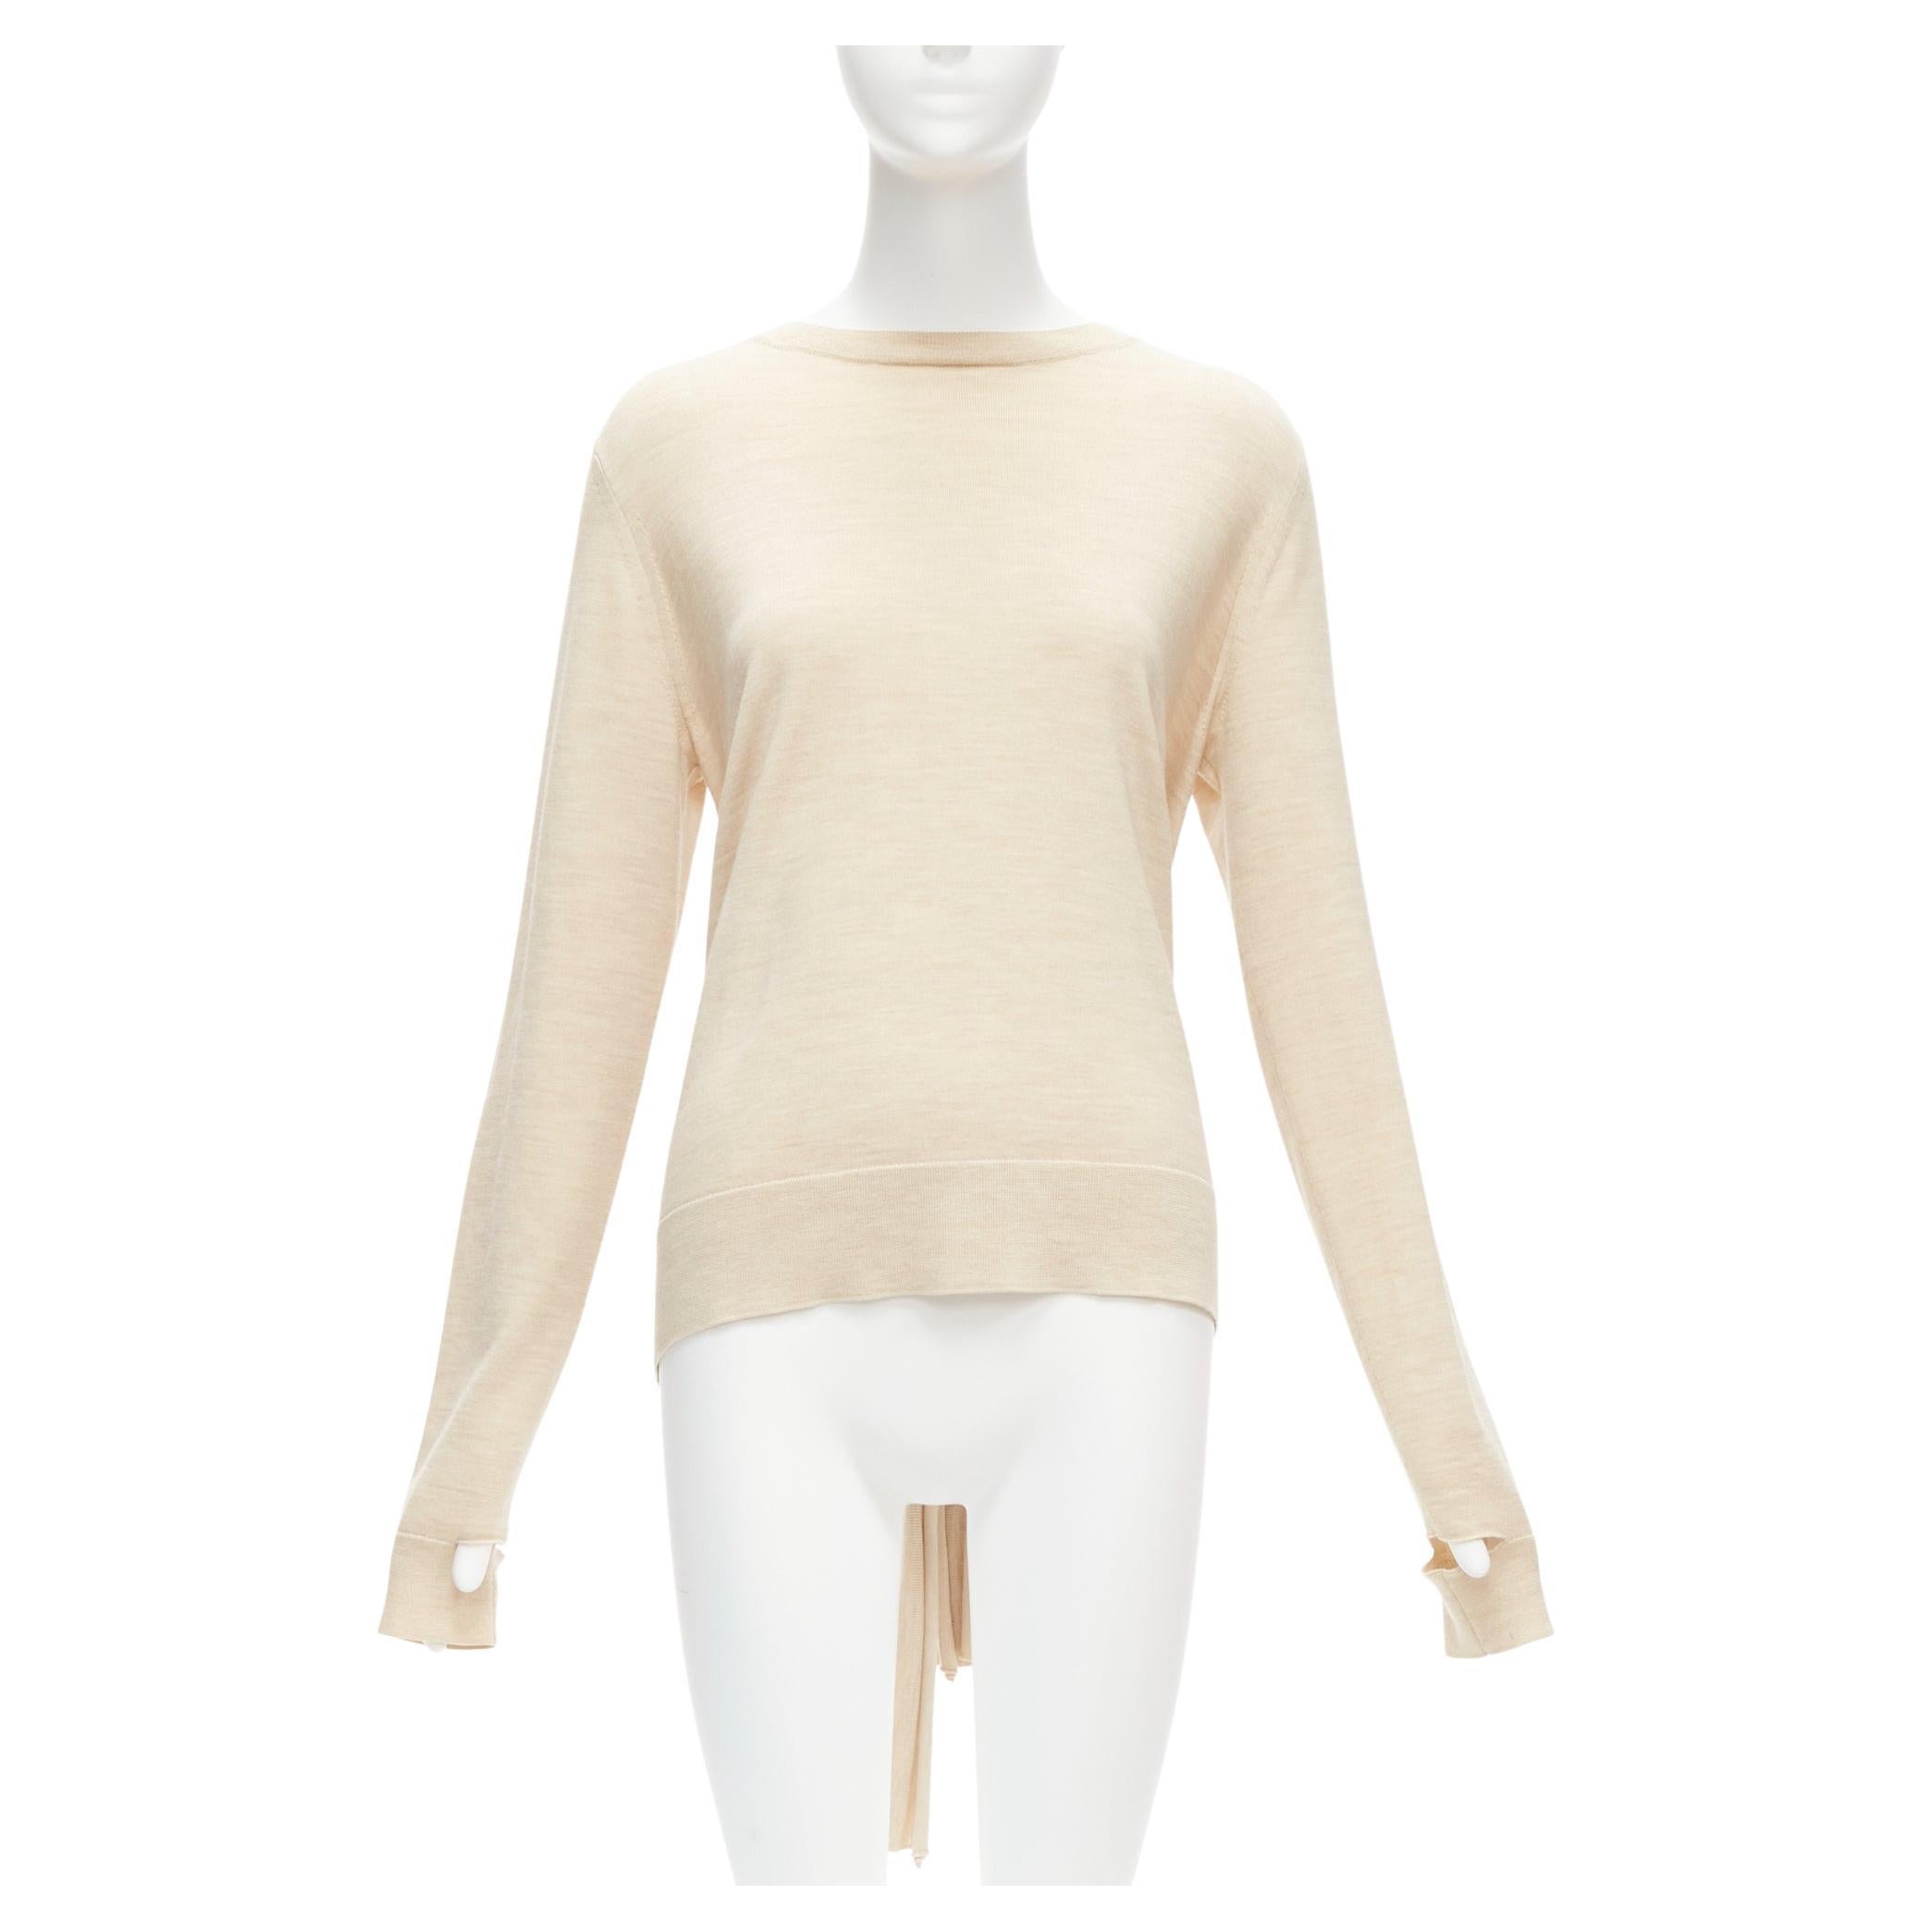 OLD CELINE Phoebe Philo beige wool silk knot tie back cut out sleeves sweater M
Reference: TGAS/D00352
Brand: Celine
Designer: Phoebe Philo
Material: Wool, Silk
Color: Beige
Pattern: Solid
Closure: Pullover
Extra Details: Cuff cut out details. Back